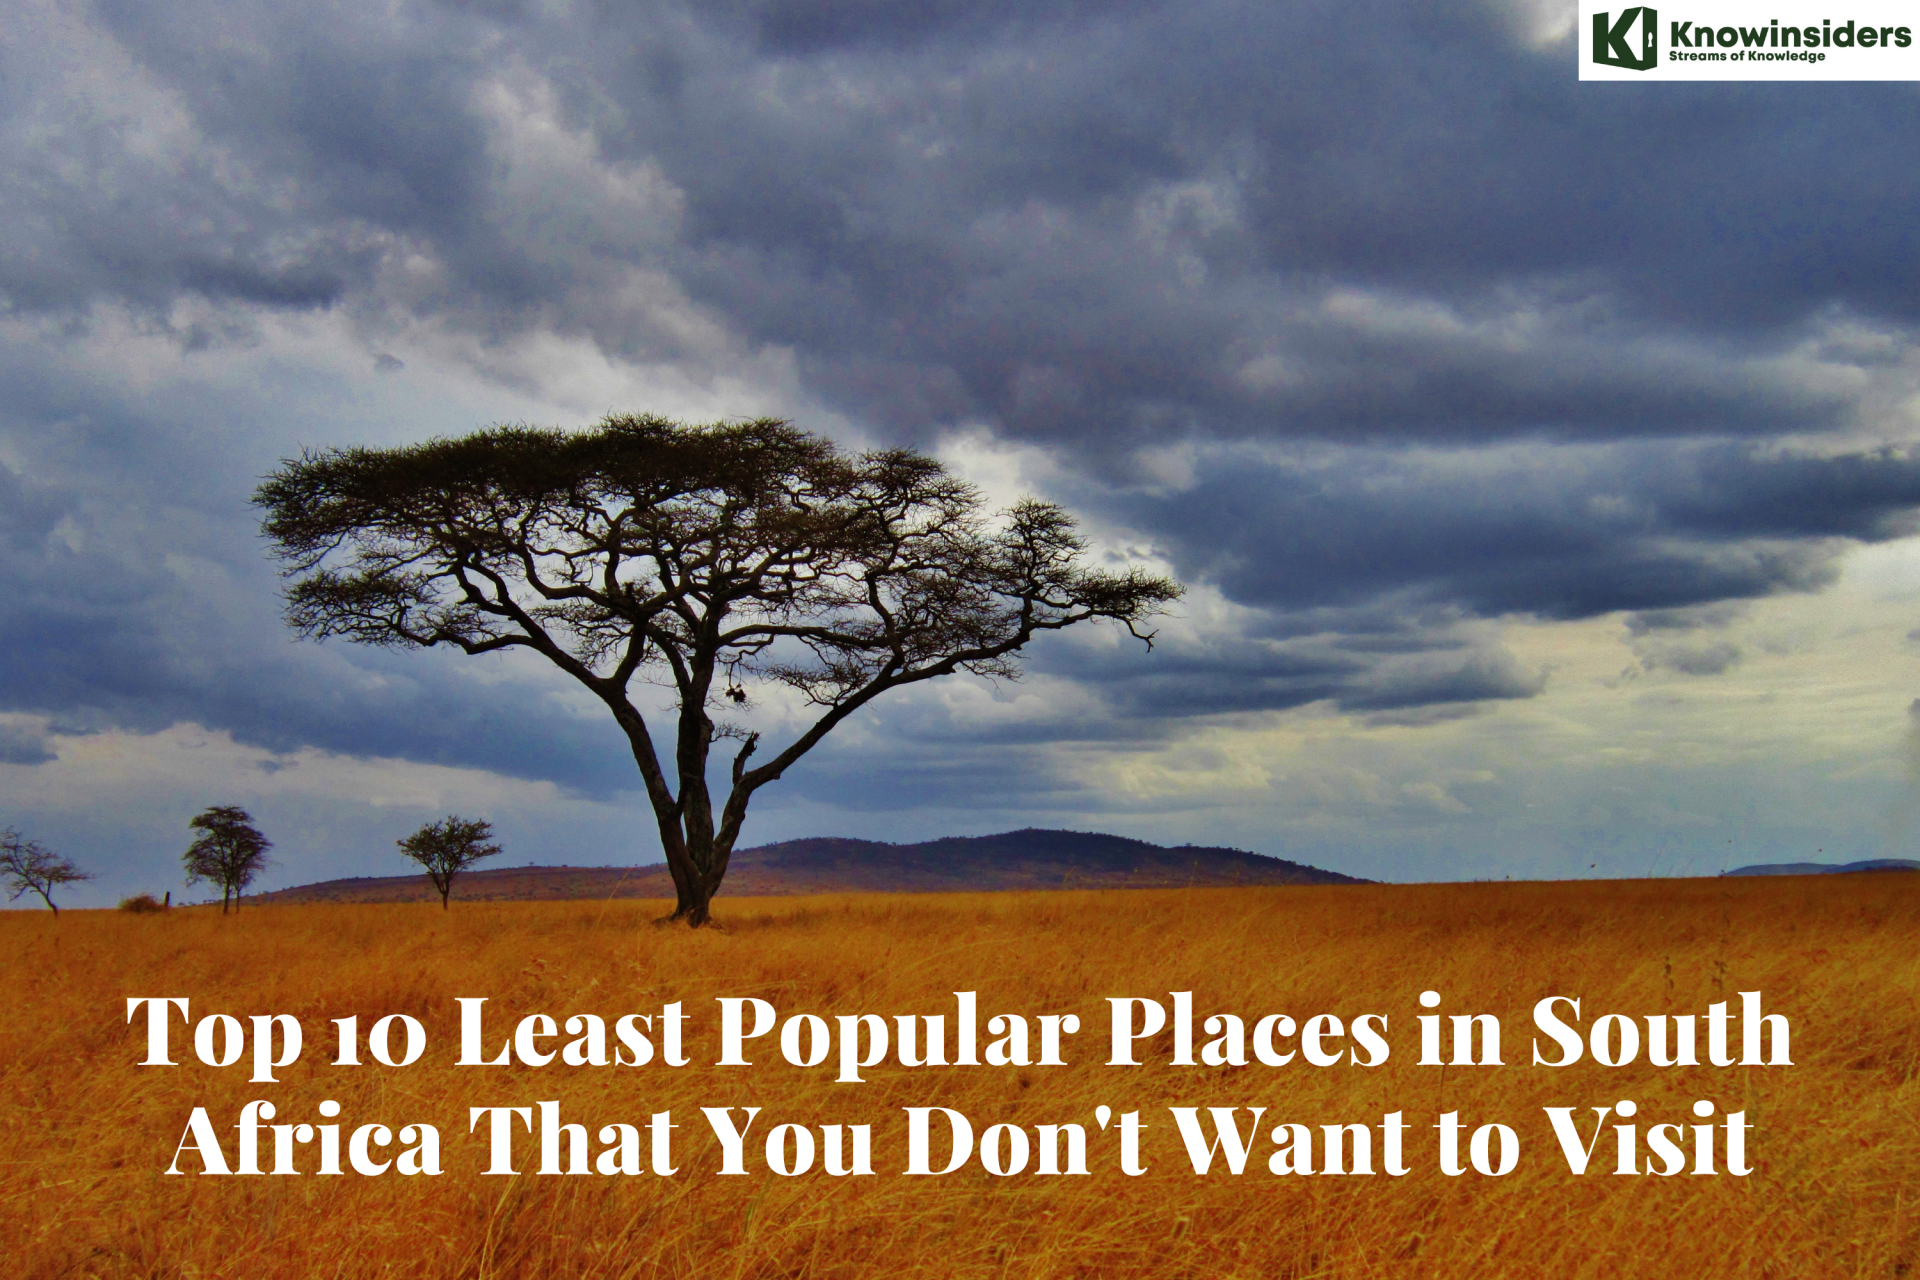 Top 10 Least-Visited Places in South Africa Makes You Surprised